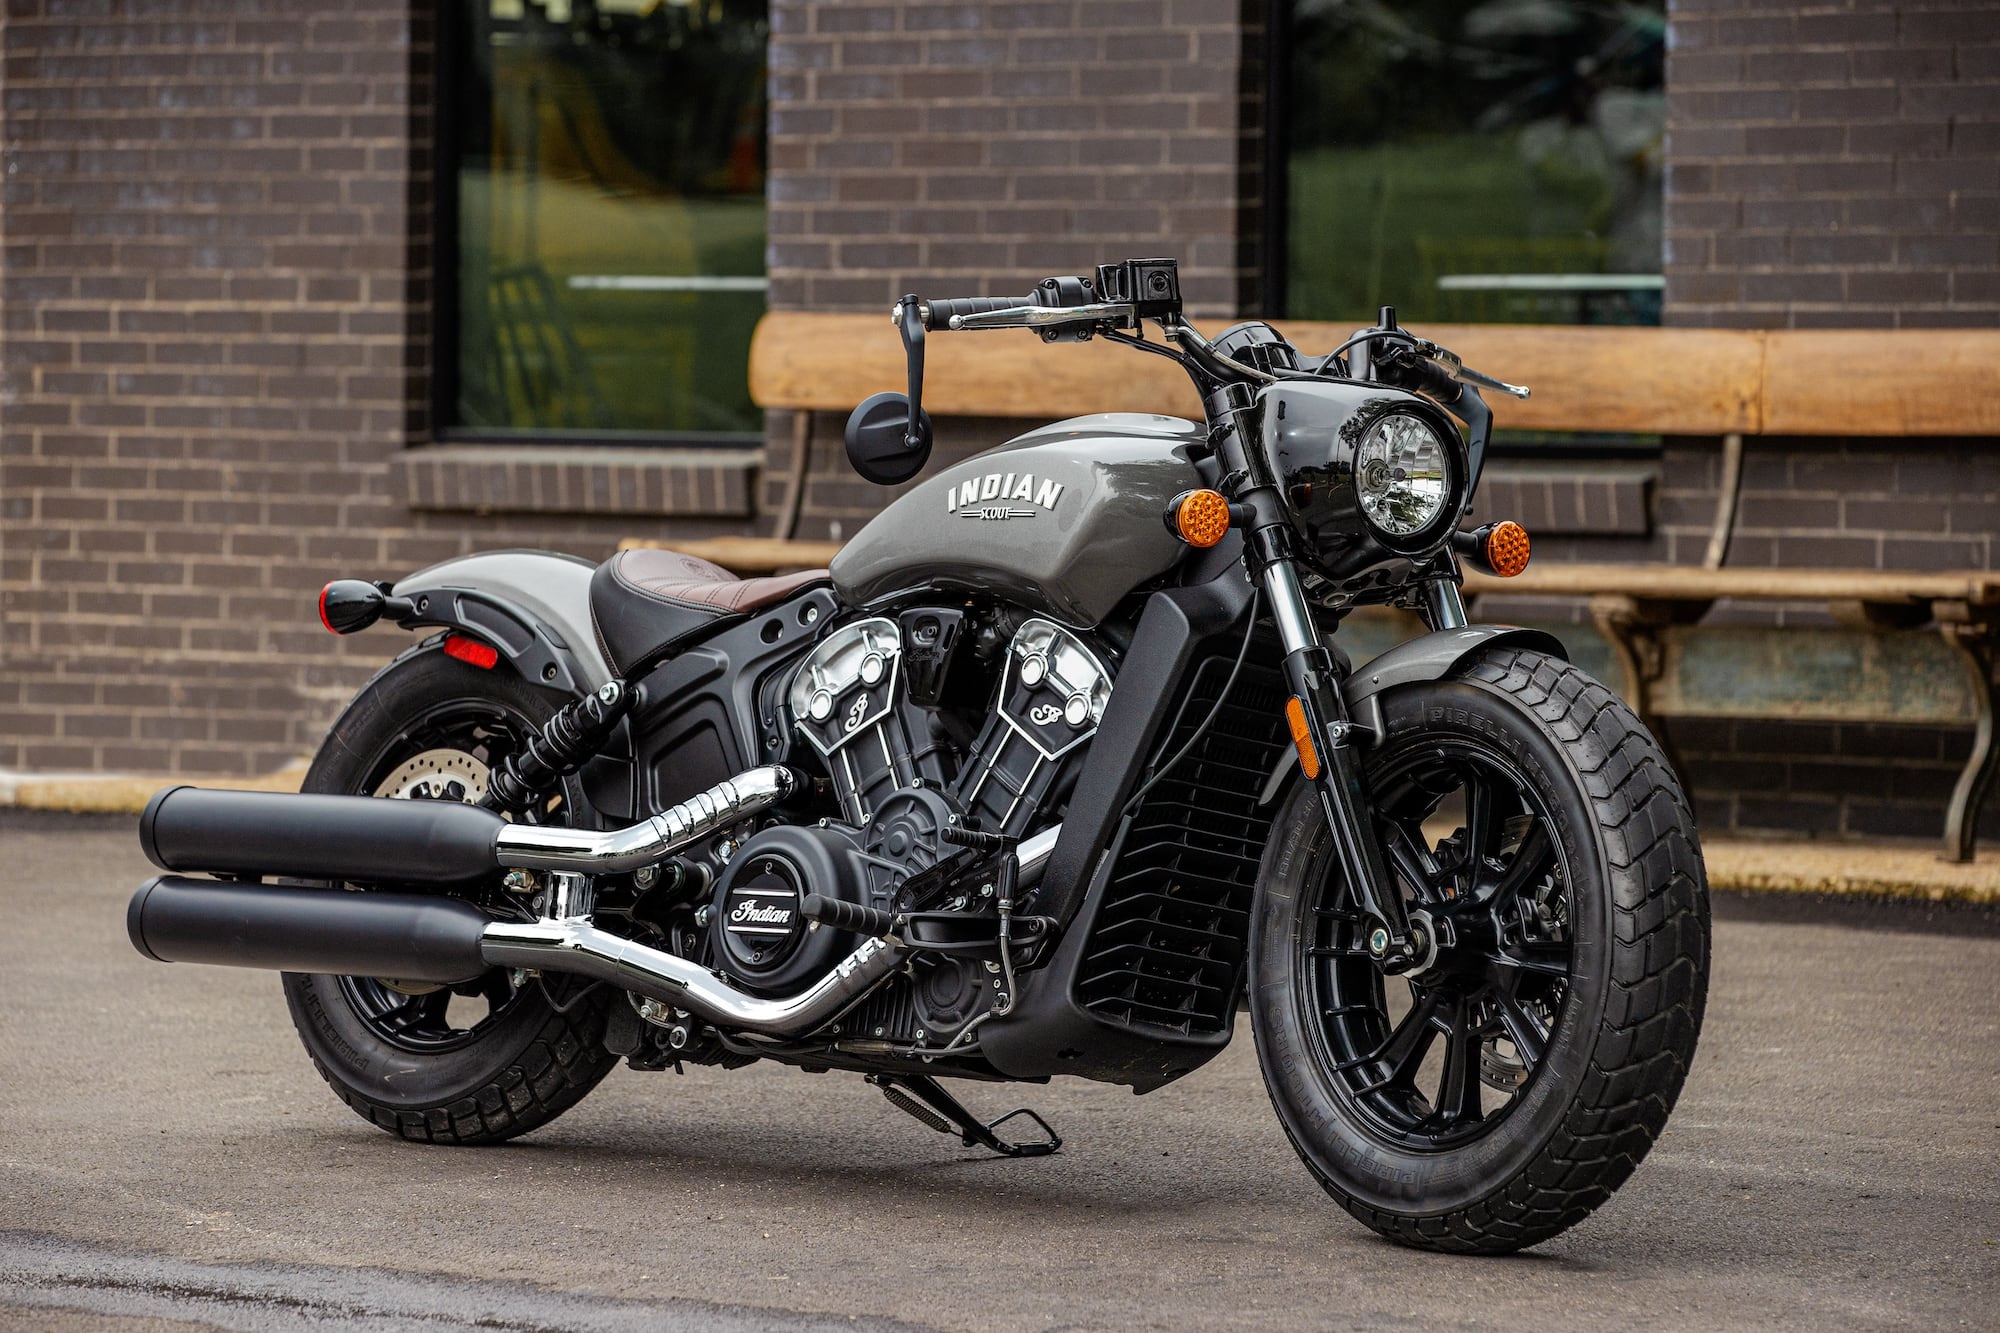 Indian's Scout Bobber. Media provided by Motofomo.